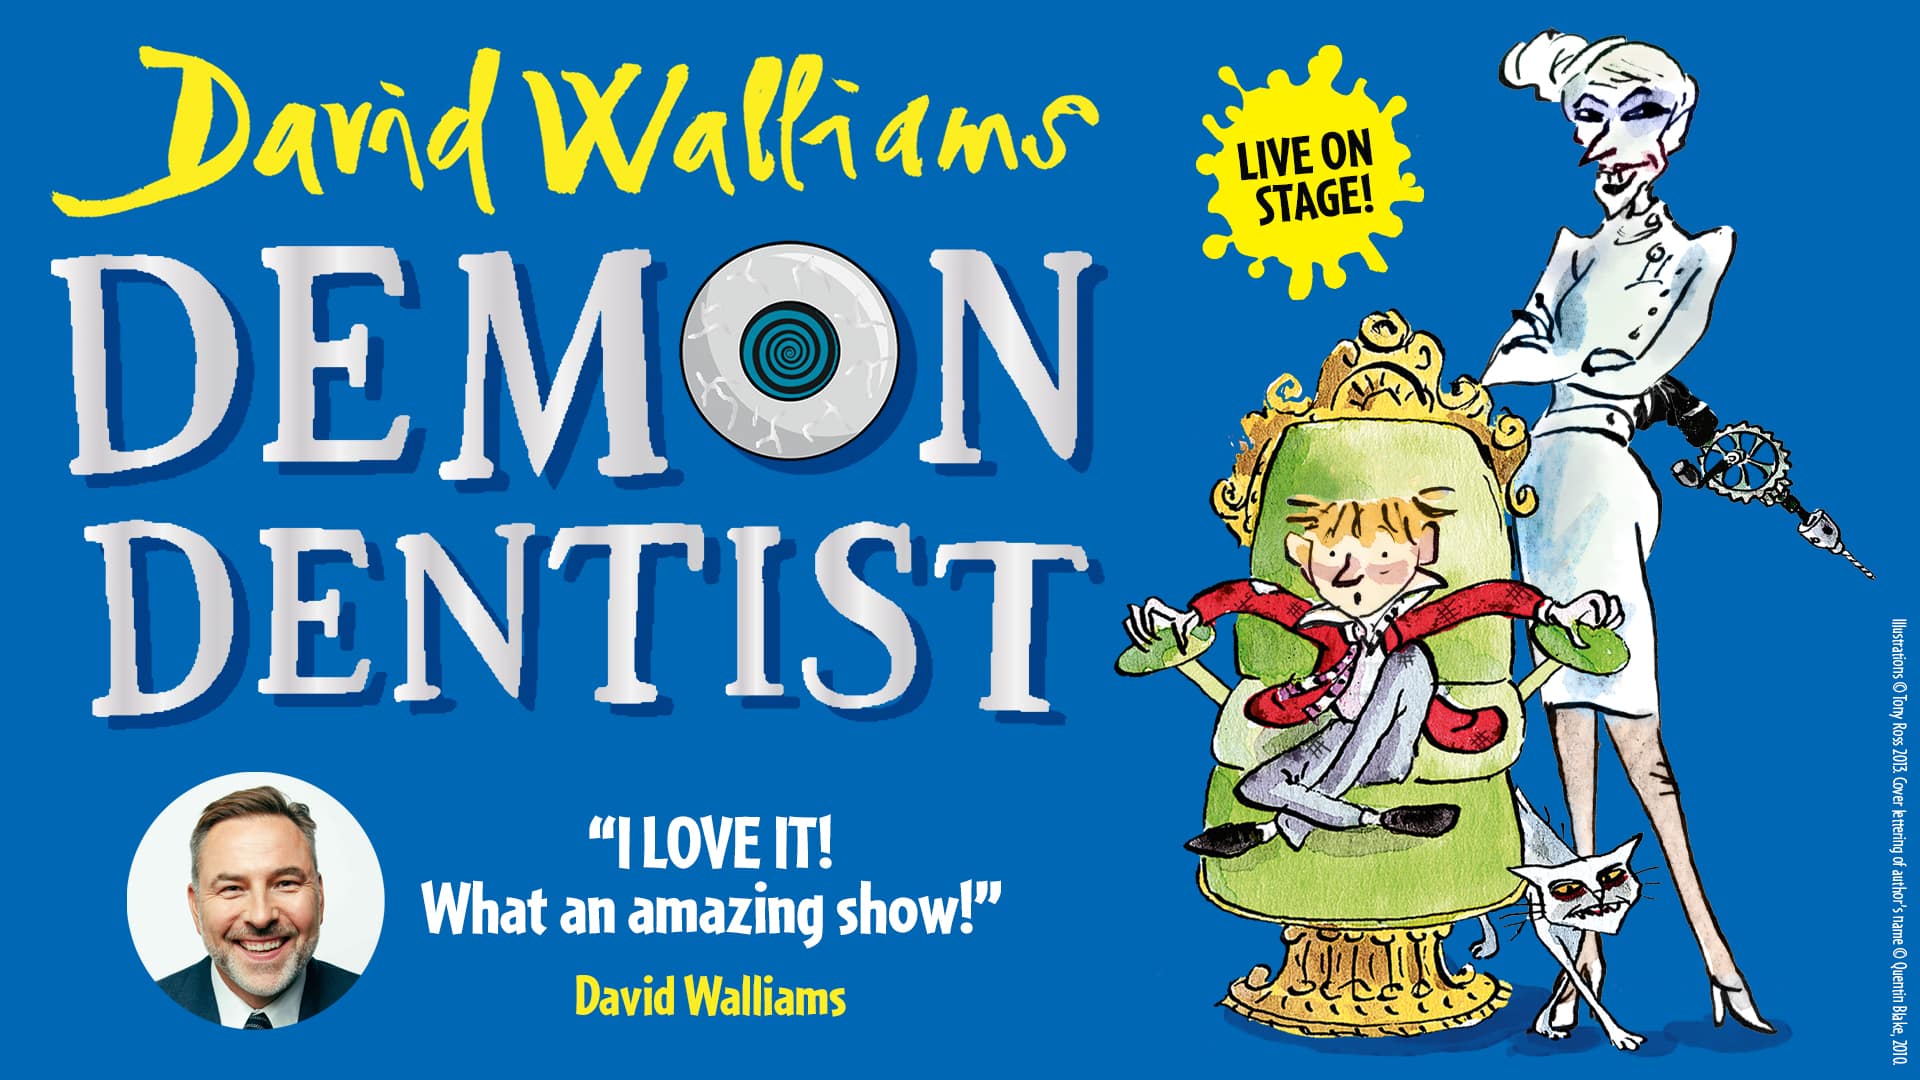 Demon Dentist artwork. Background: Blue. Foreground (left to right): (Left) Title text reads ‘David Walliams Demon Dentist Live on Stage’. (Right) An illustration of an evil looking dentist holding a mechanical drill stood behind a young boy squirming in a green chair. A white cat walks over the dentist’s leg. Under the title there is a headshot photo of David Walliams smiling with text next to it reading: